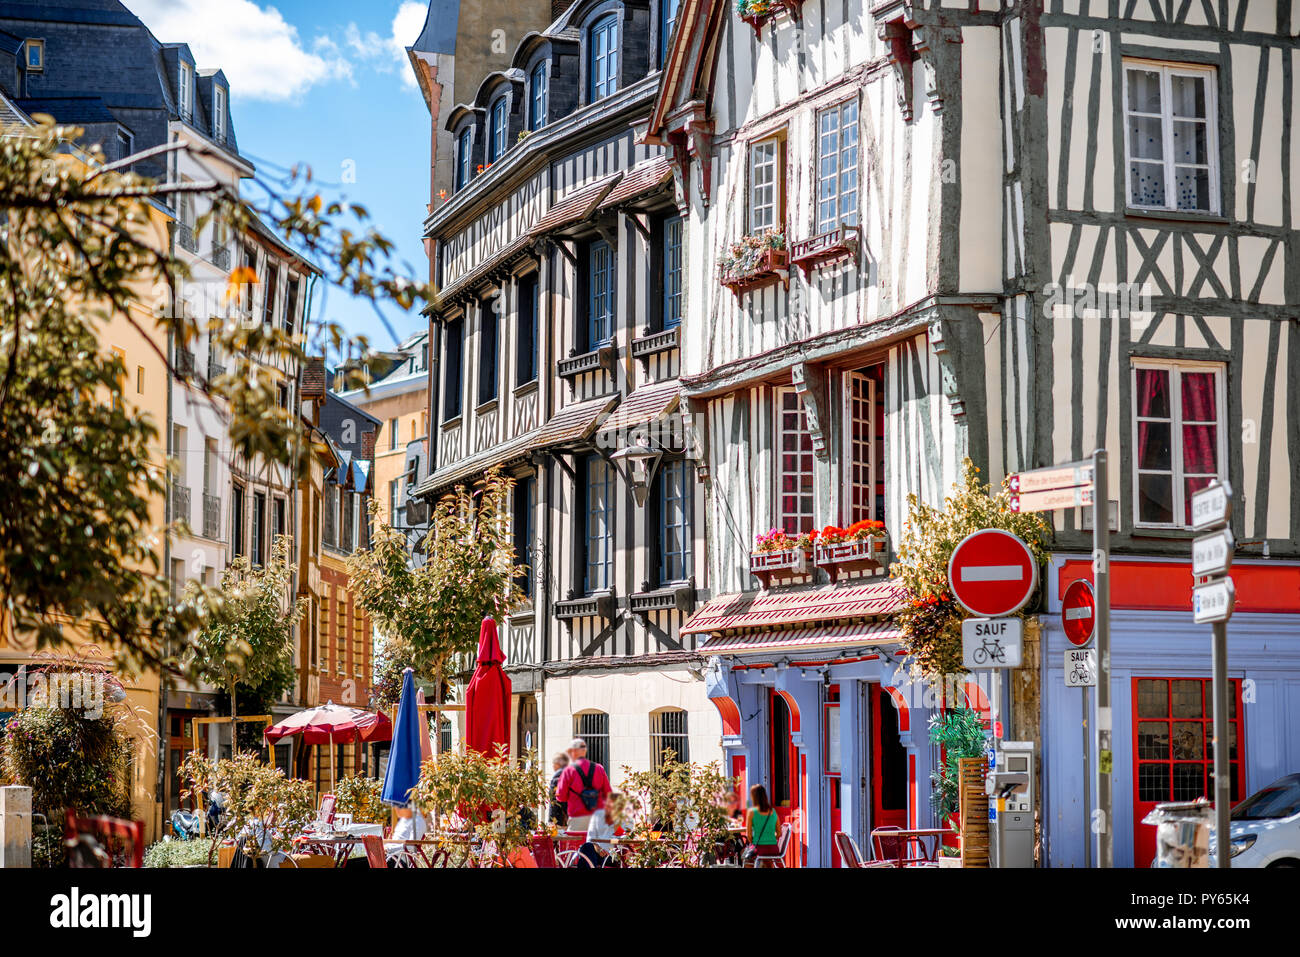 Beautiful colorful half-timbered houses in Rouen city, the capital of Normandy region in France Stock Photo